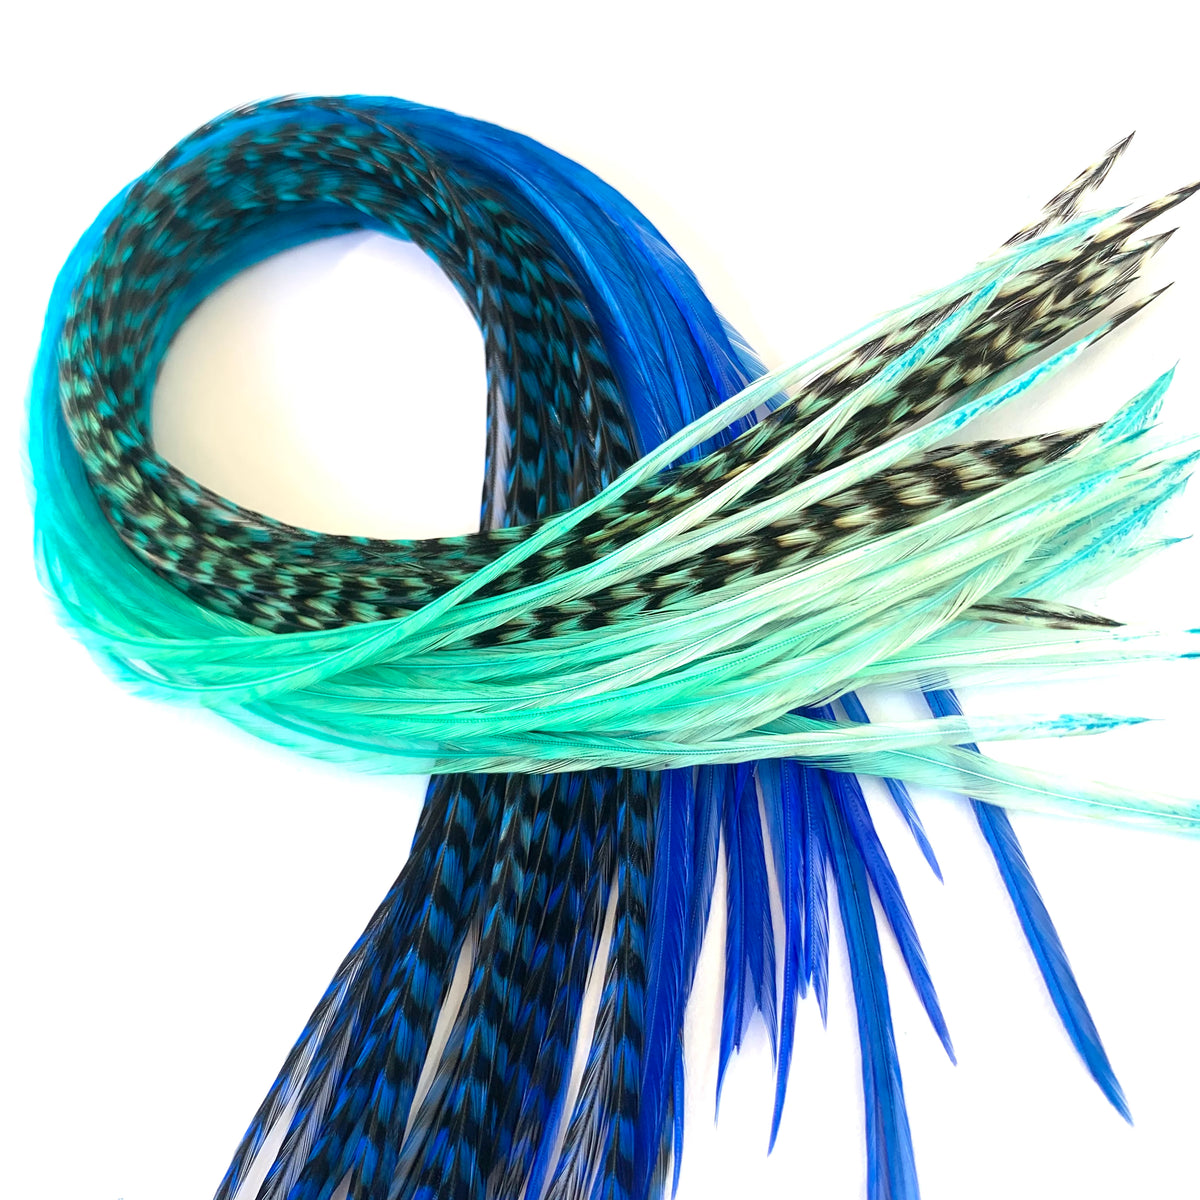 Feather Hair Extension Clip in Blue, Turquoise, Pale Blue and Grizzly, Choice of Clip Color. Hair Clip, Festival Hair, Blue, Hair Feathers